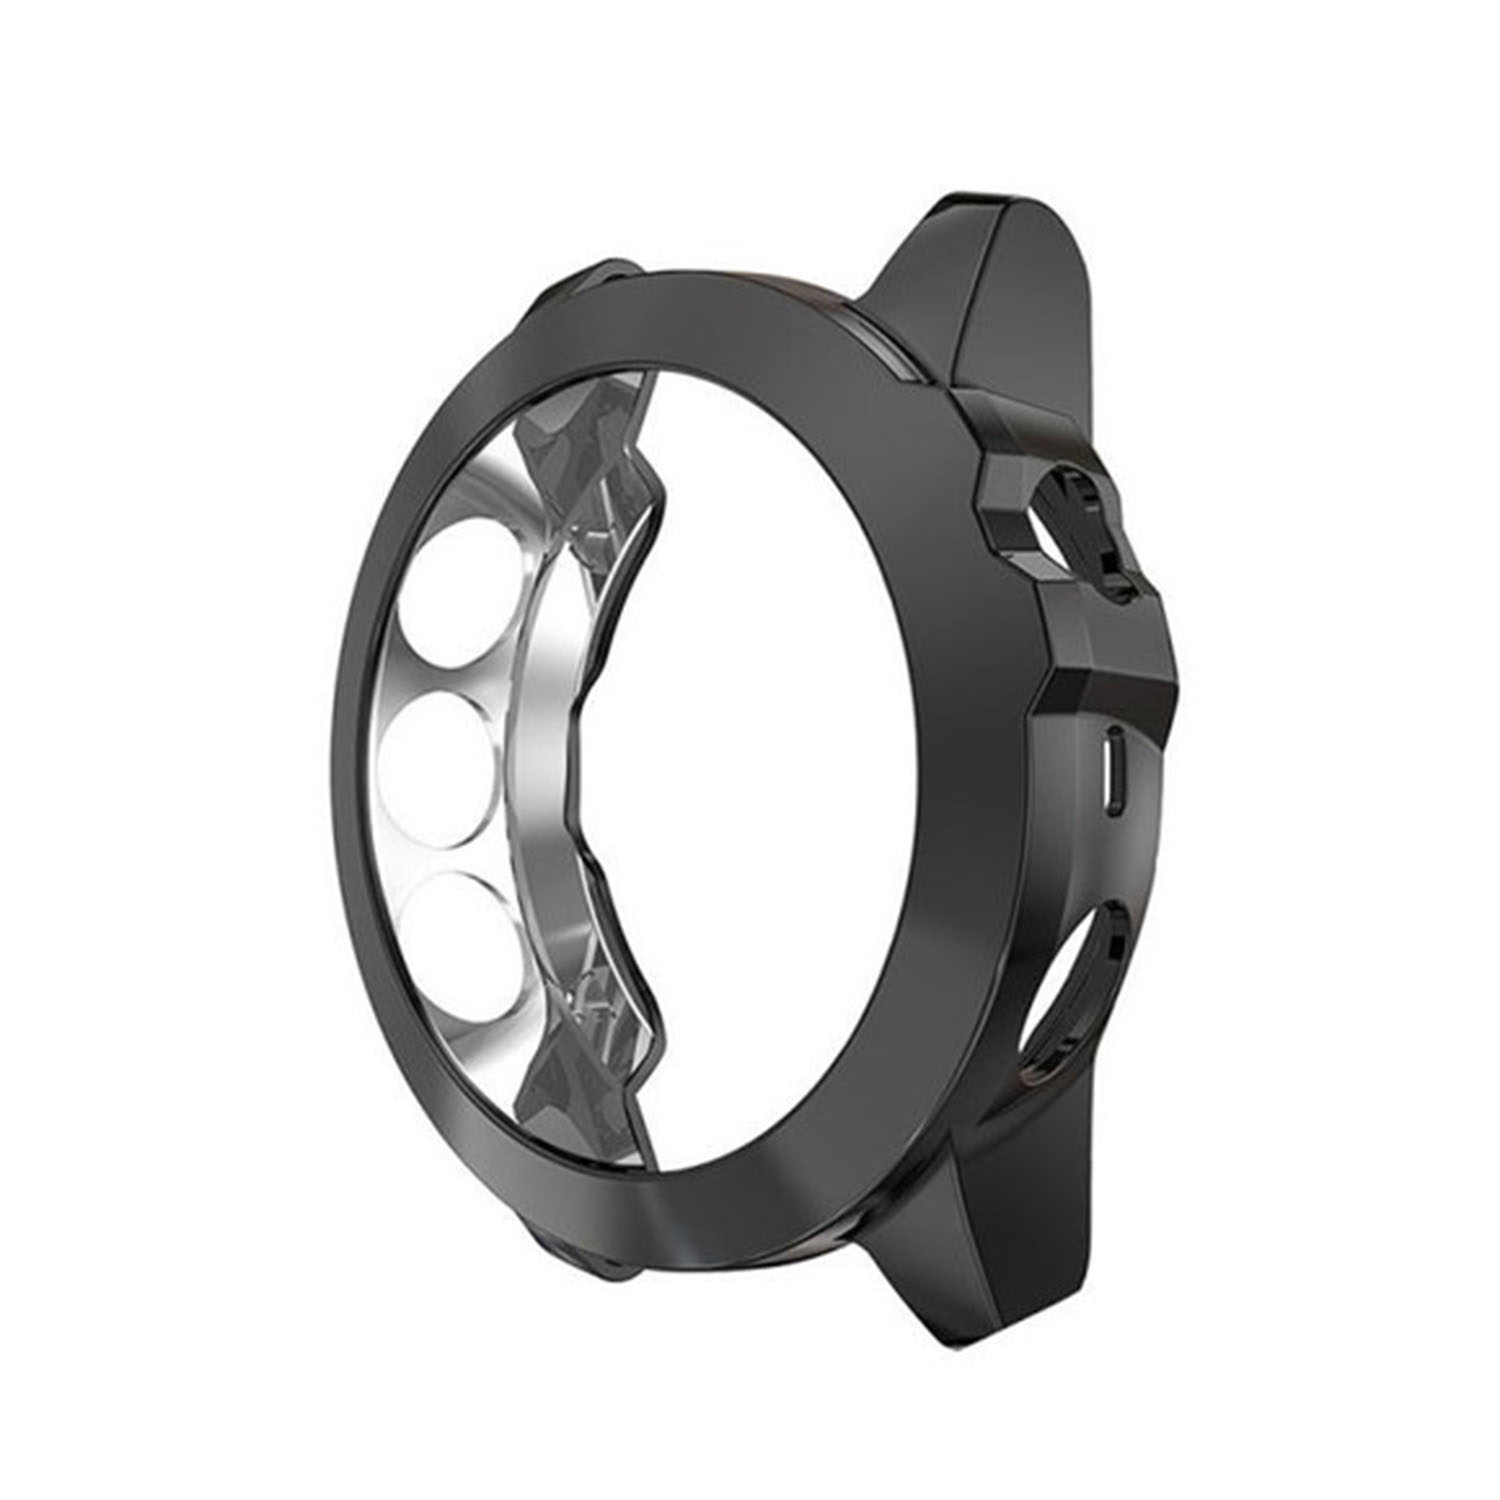 FocusFit – Garmin Fenix 5 / 5 Plus / 6 / 6 Pro / Forerunner 935 / 945 / Approach S60 Compatible Replacement Stainless Steel Strap